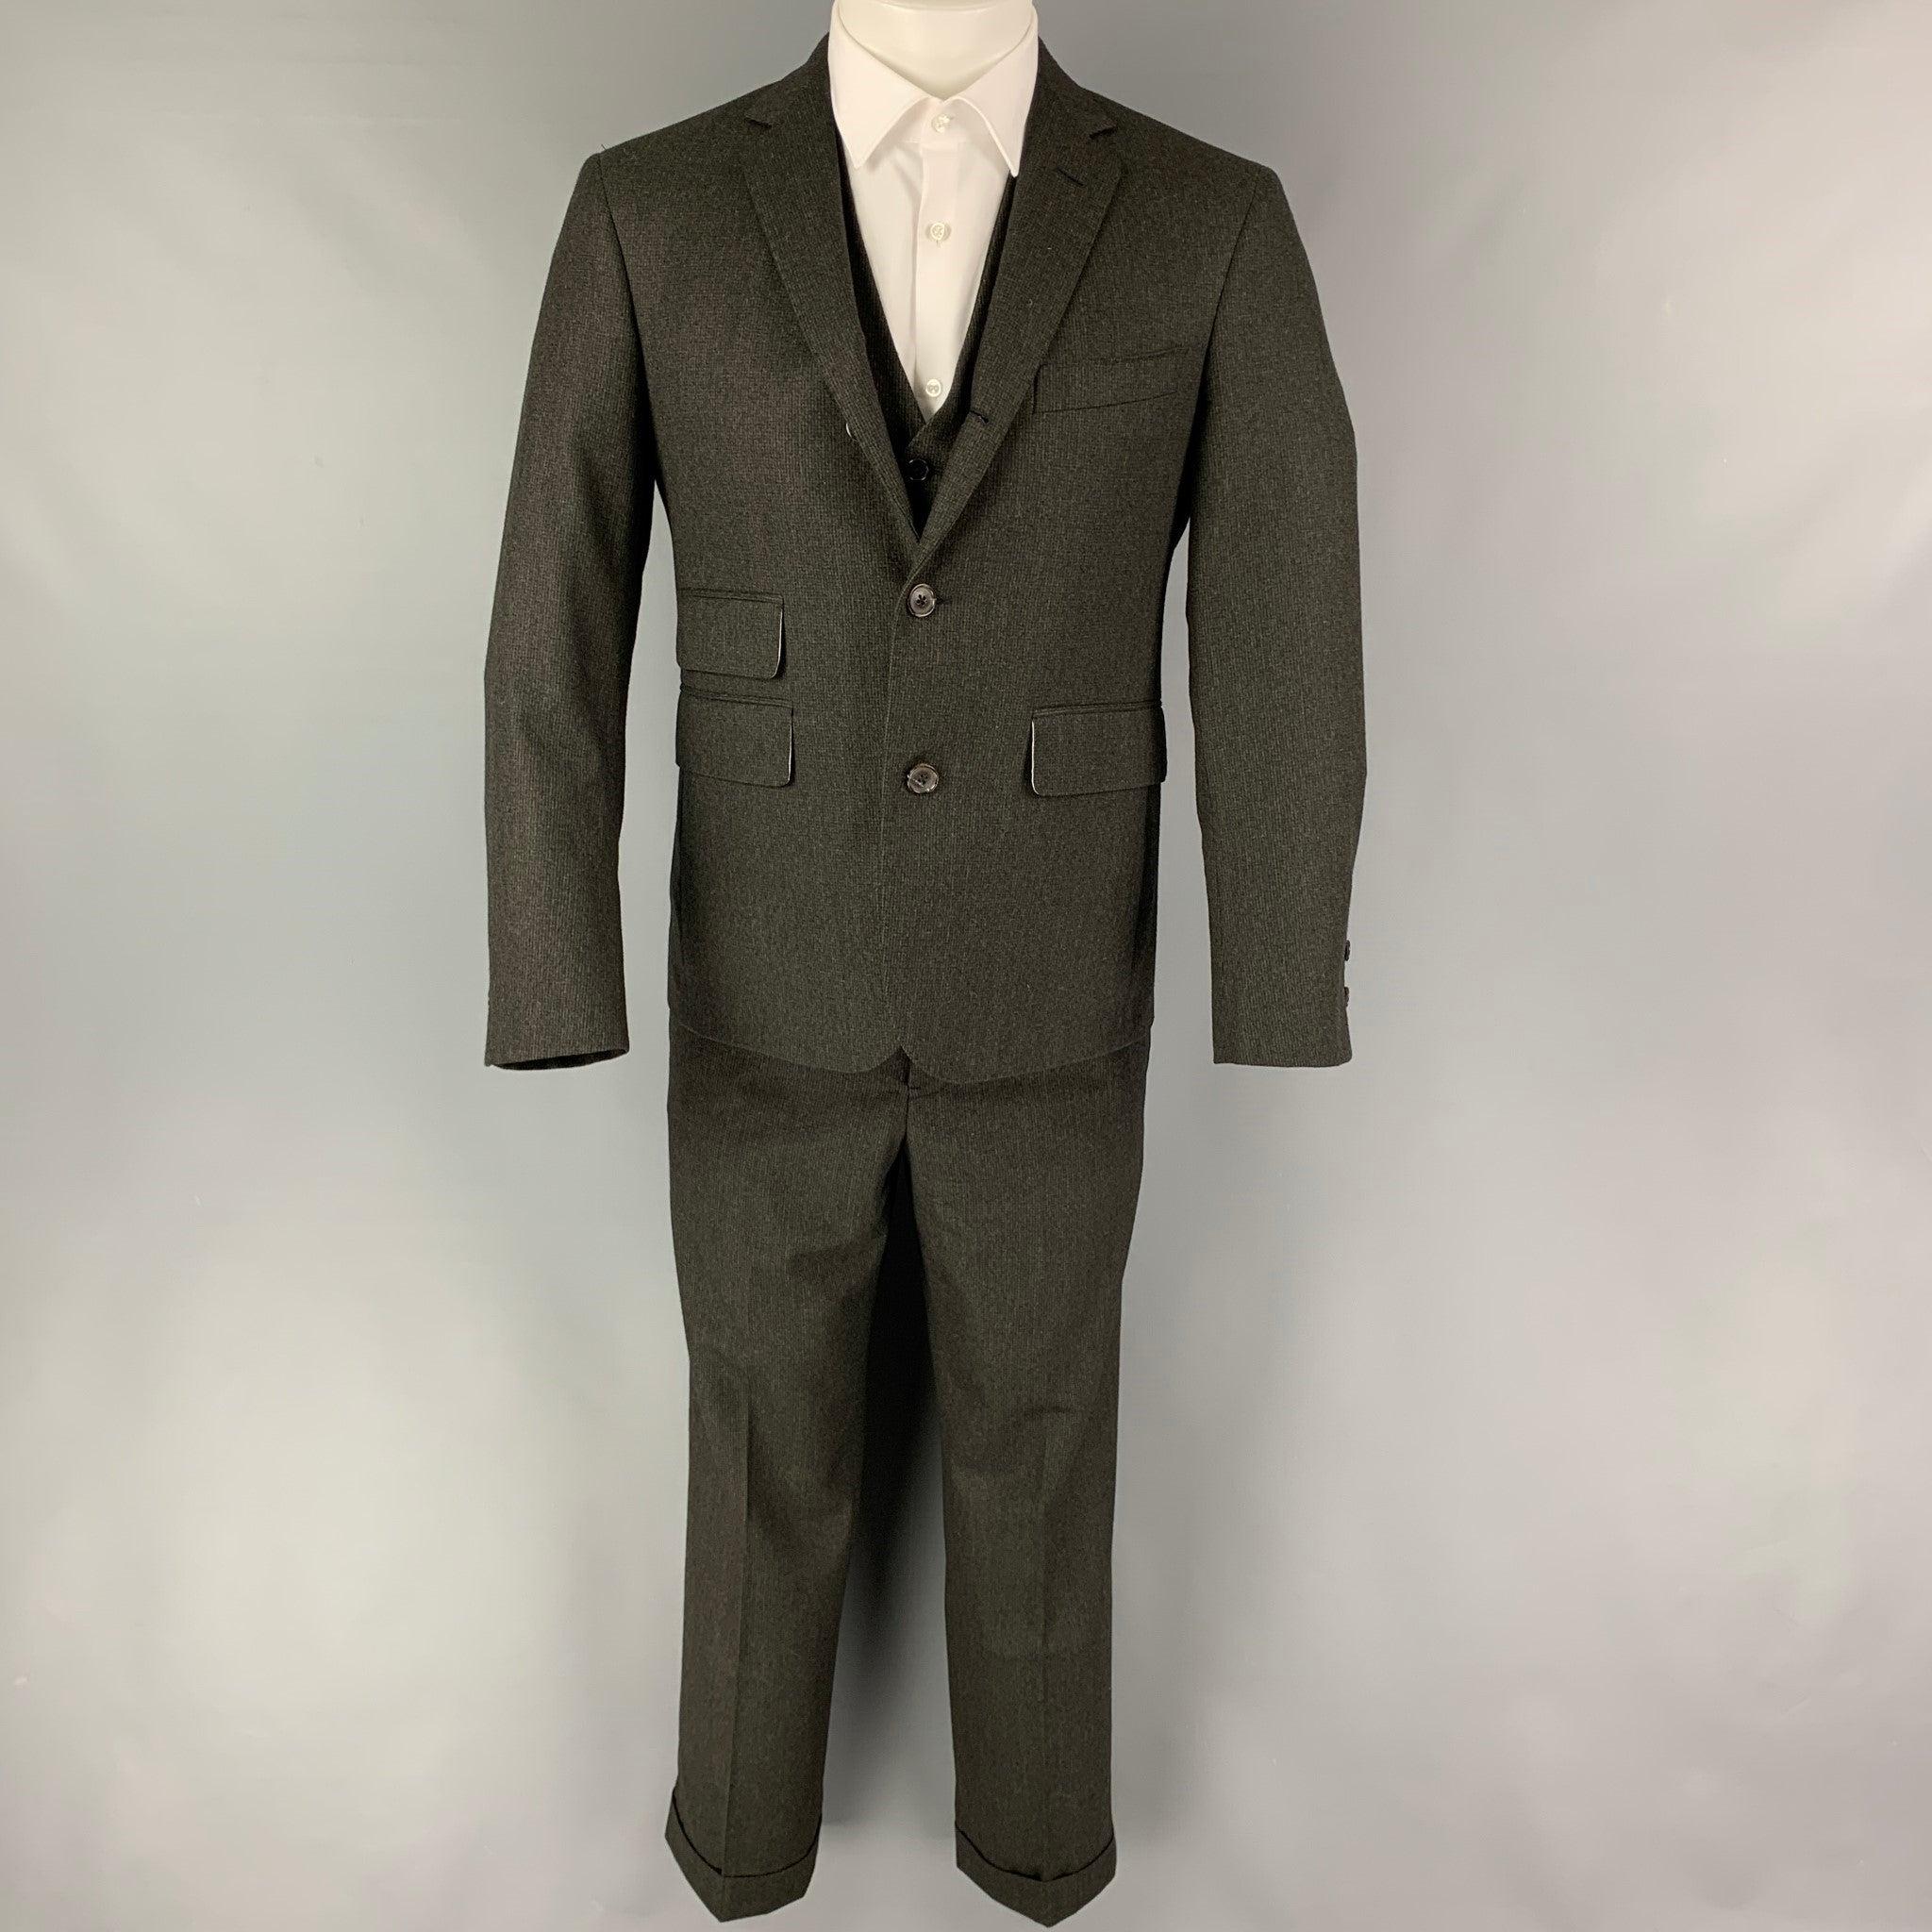 BLACK FLEECE Size 38 Grey Charcoal Grid Wool Notch Lapel 31 31 Suit In Good Condition For Sale In San Francisco, CA